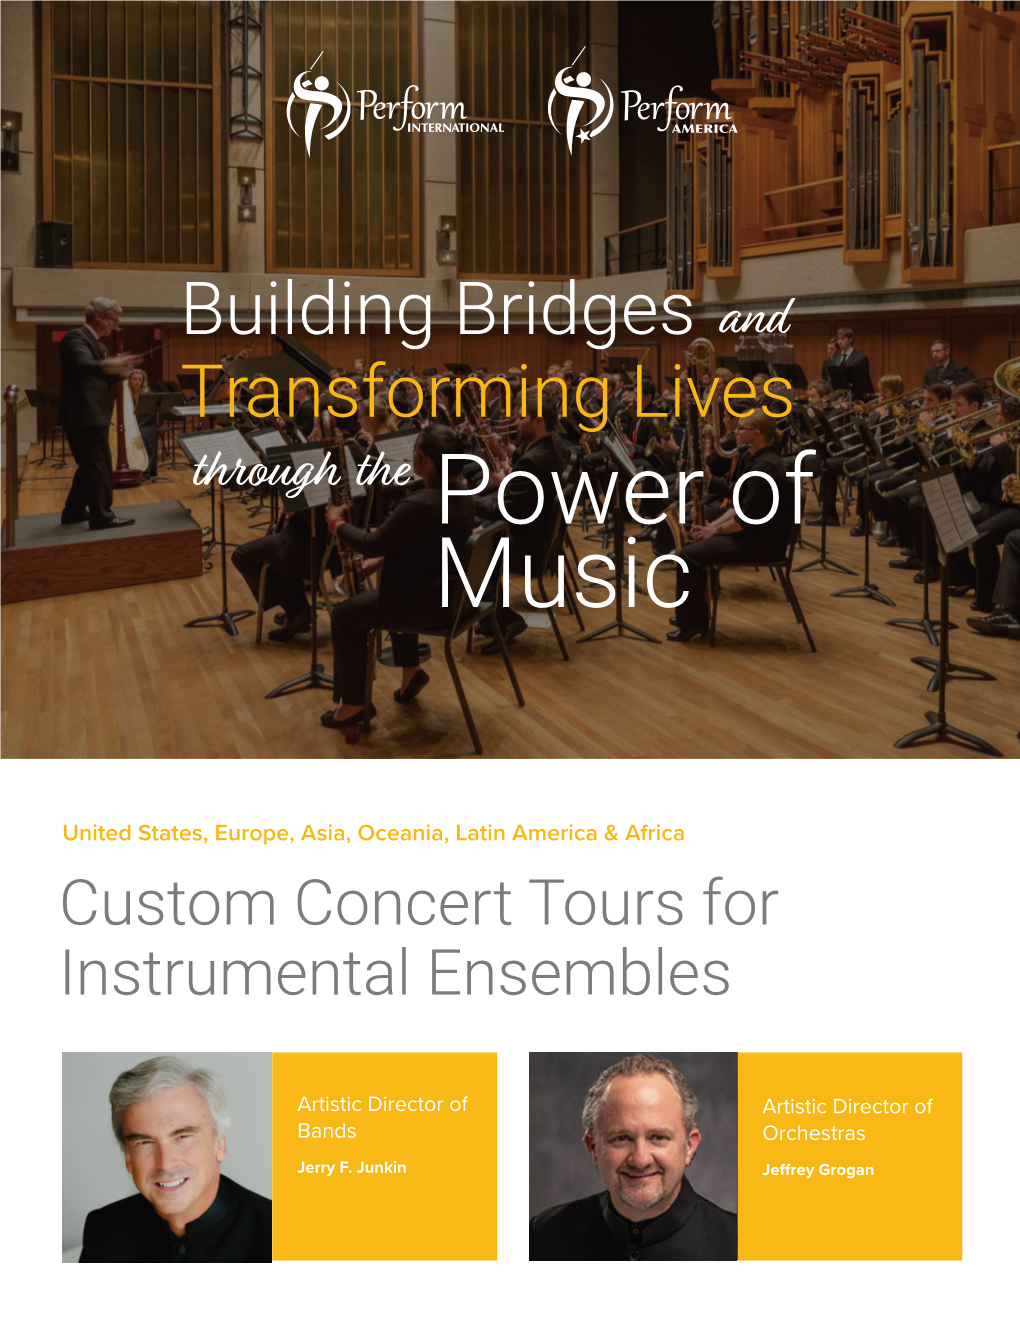 Learn More About Custom Instrumental Trips